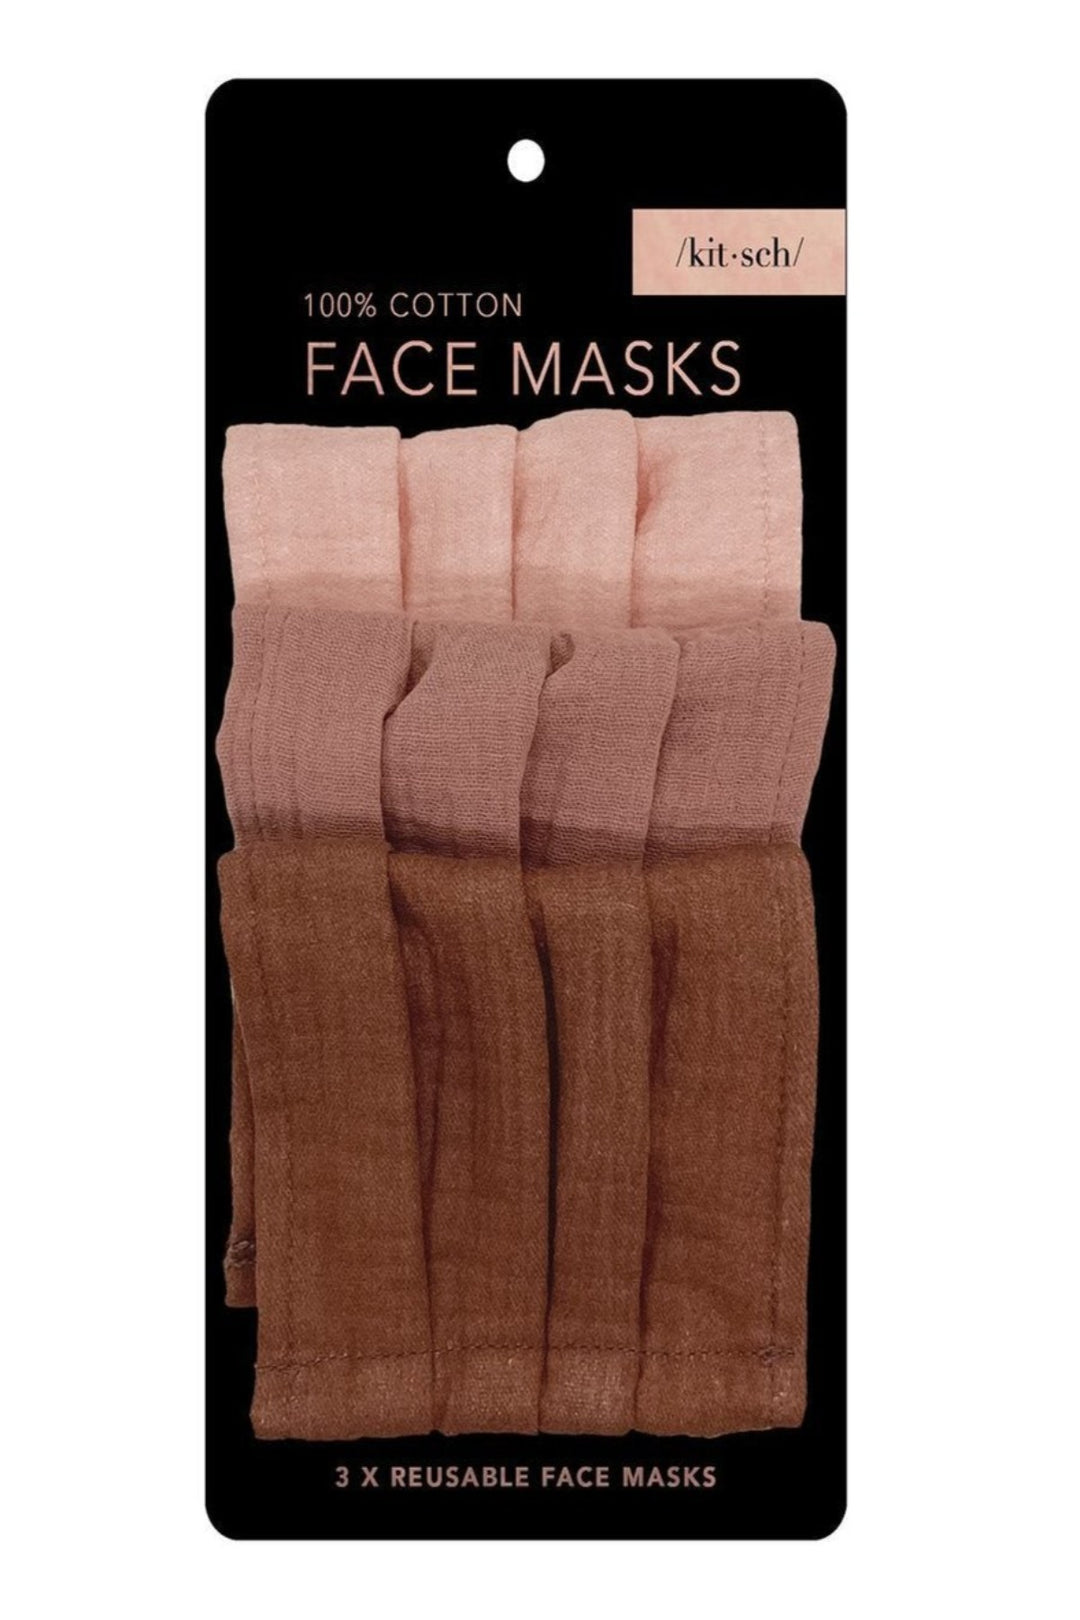 KITSCH STAY SAFE COTTON FACE MASK - 3 PIECE SET IN DUSTY ROSE